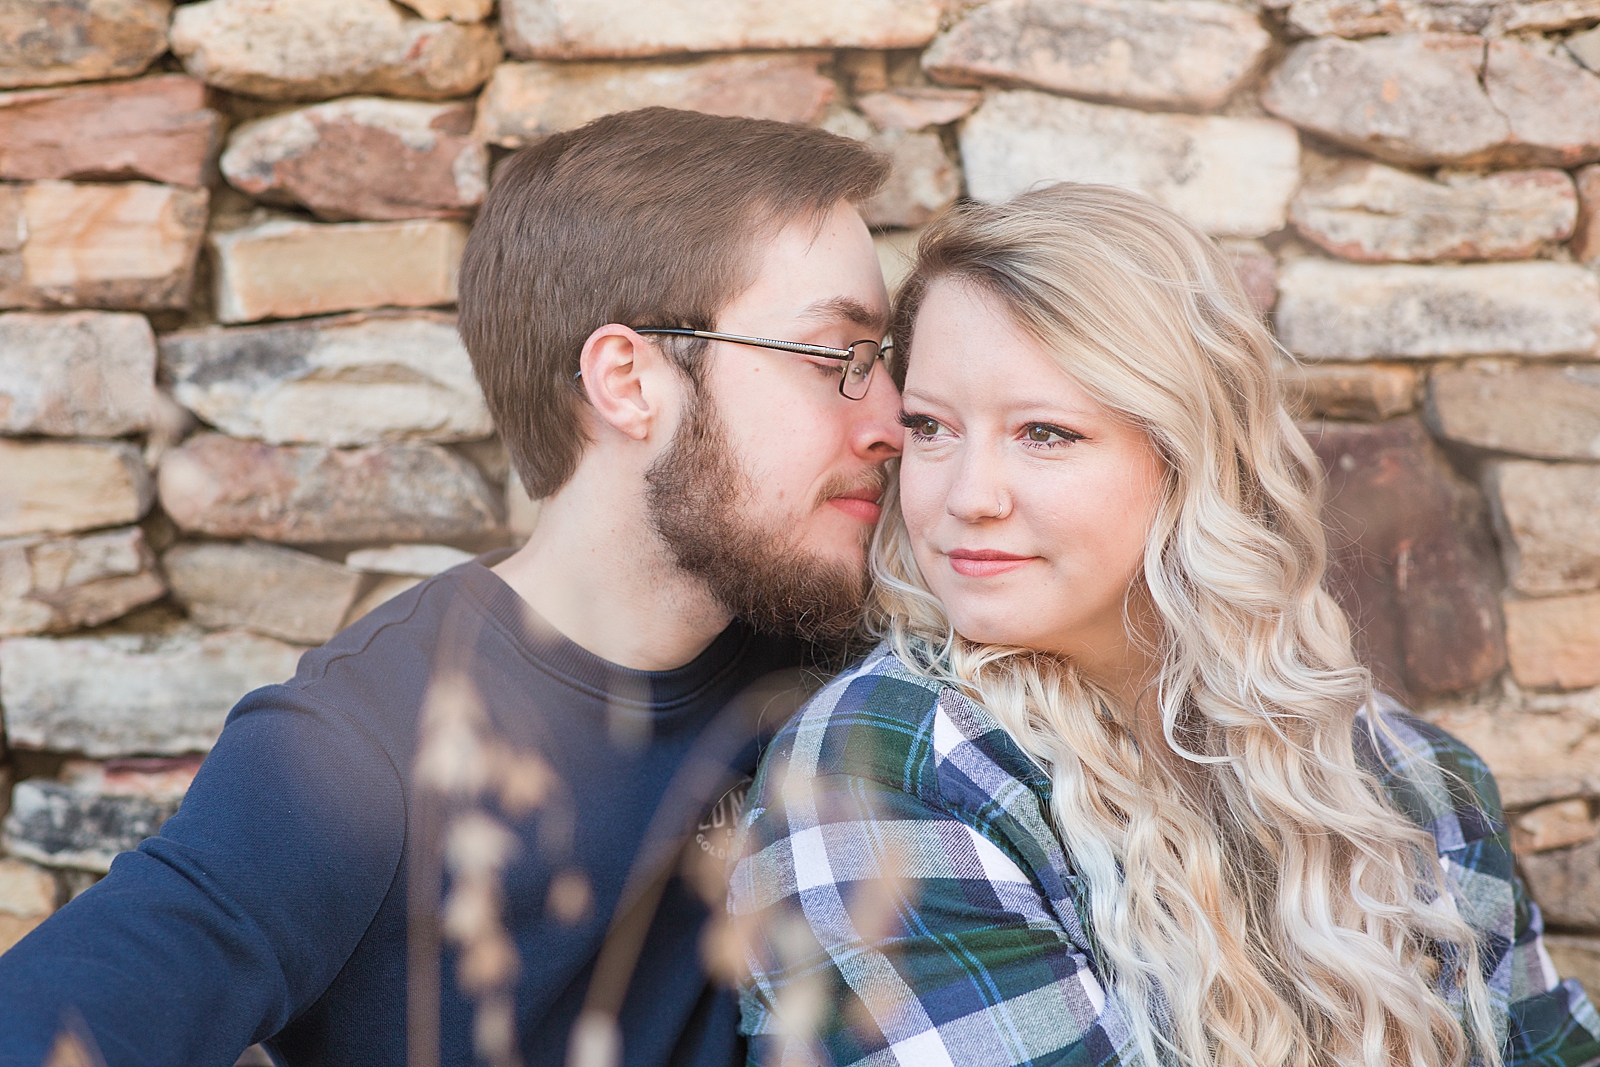 Ocoee River Engagement Session Cody and Haley in front of rock wall Photo